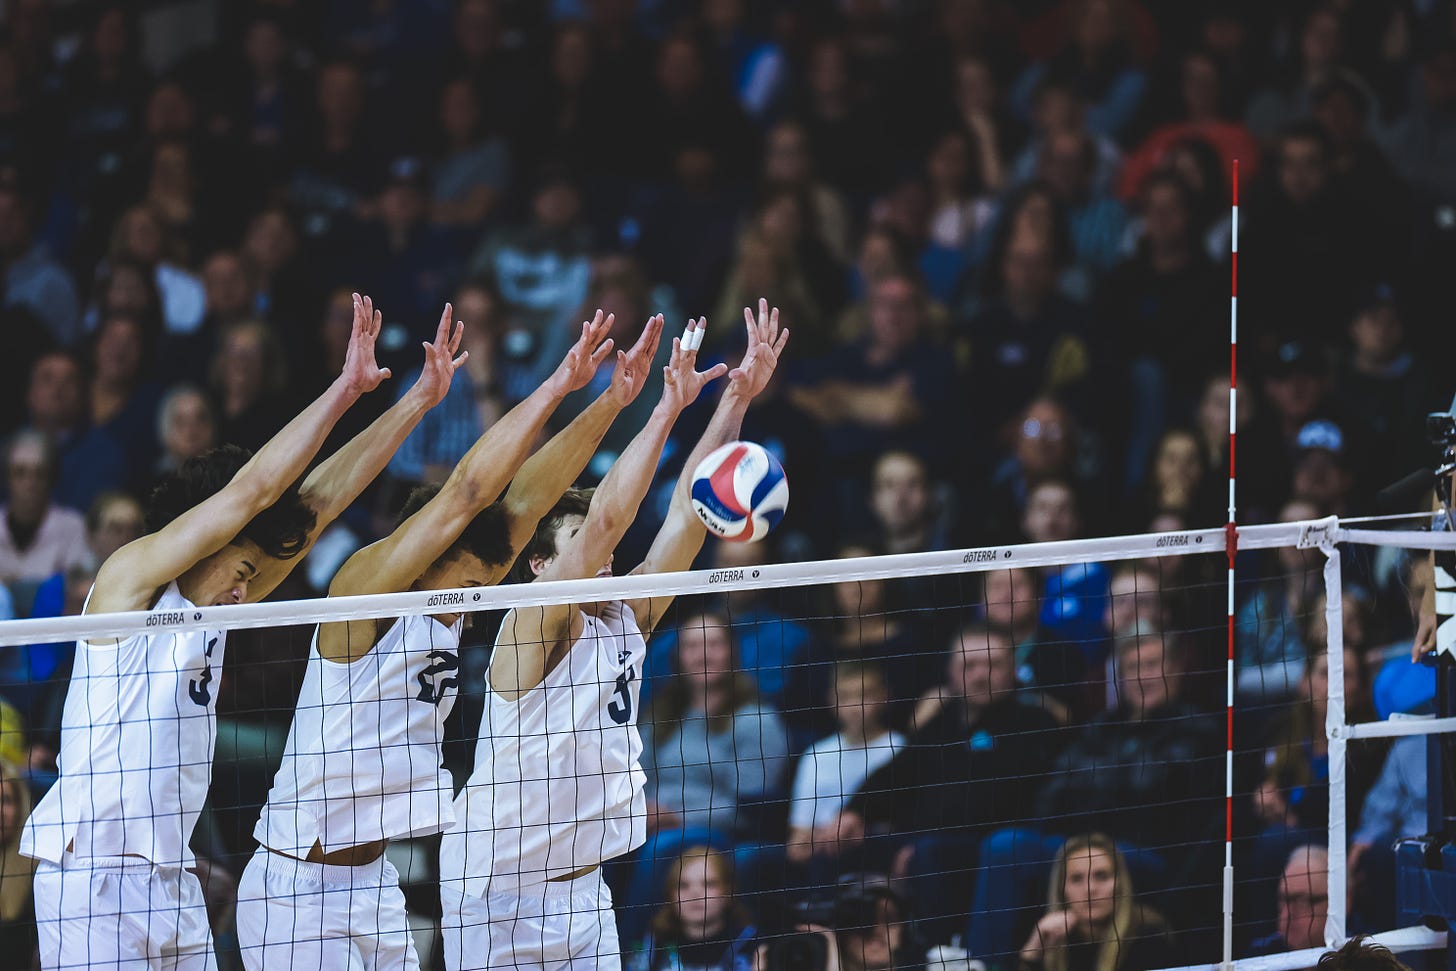 Three volleyball players jumping at the net with hands in the air